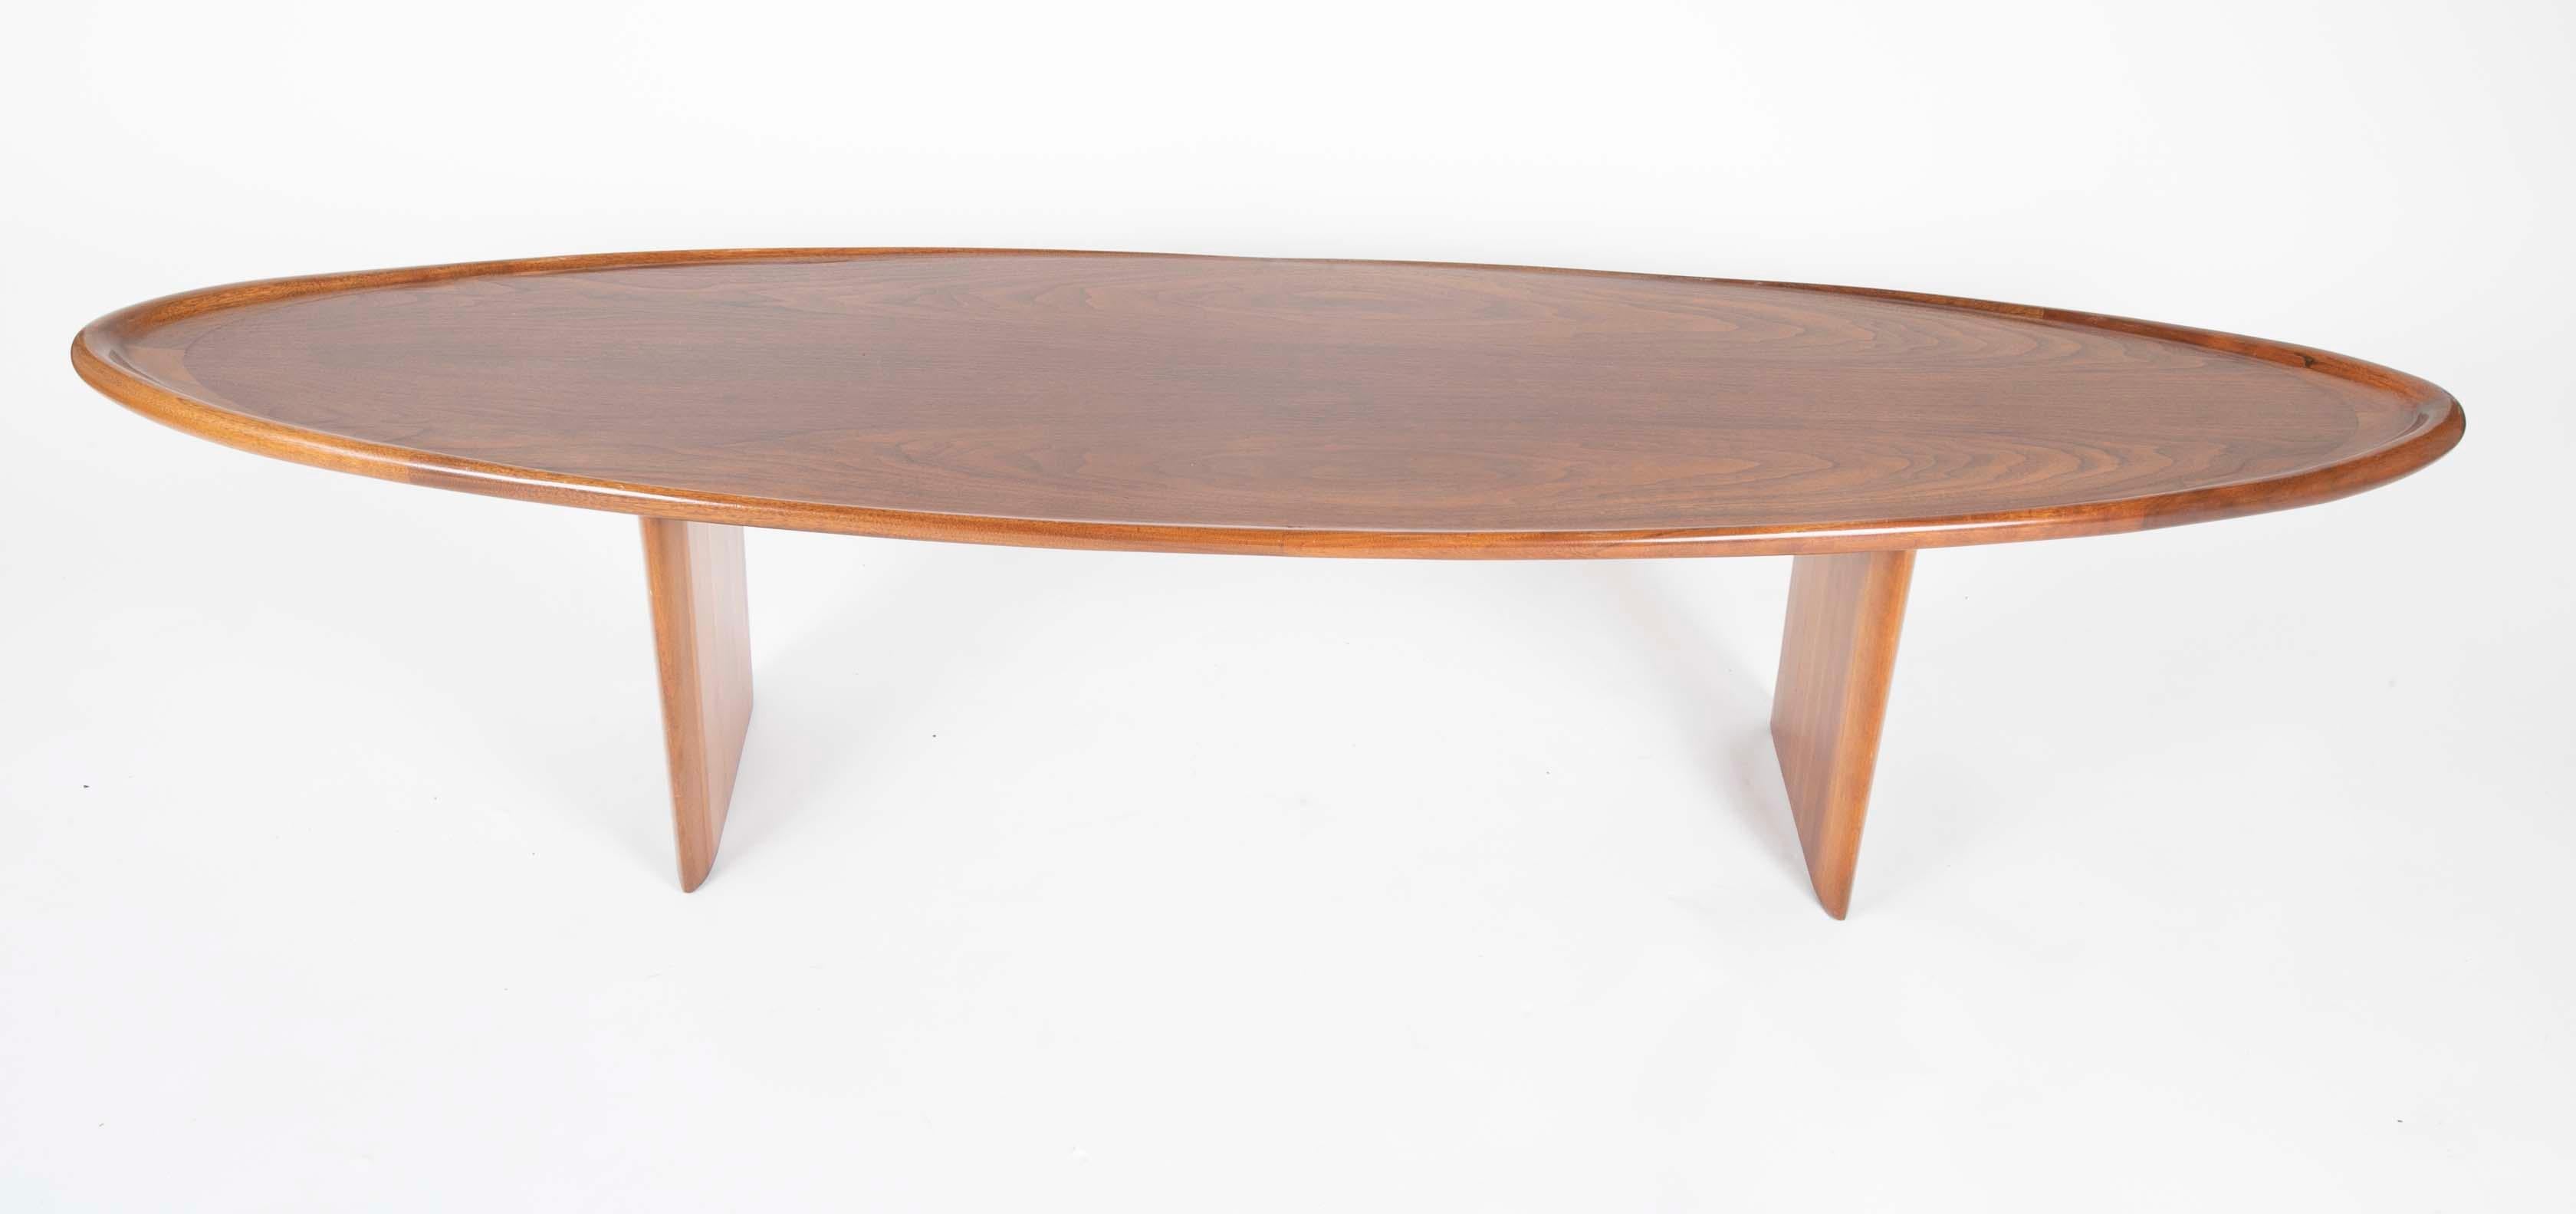 T. H. Robsjohn-Gibbings (1905-1976) for Widdicomb elongated oval coffee table with lipped ends.